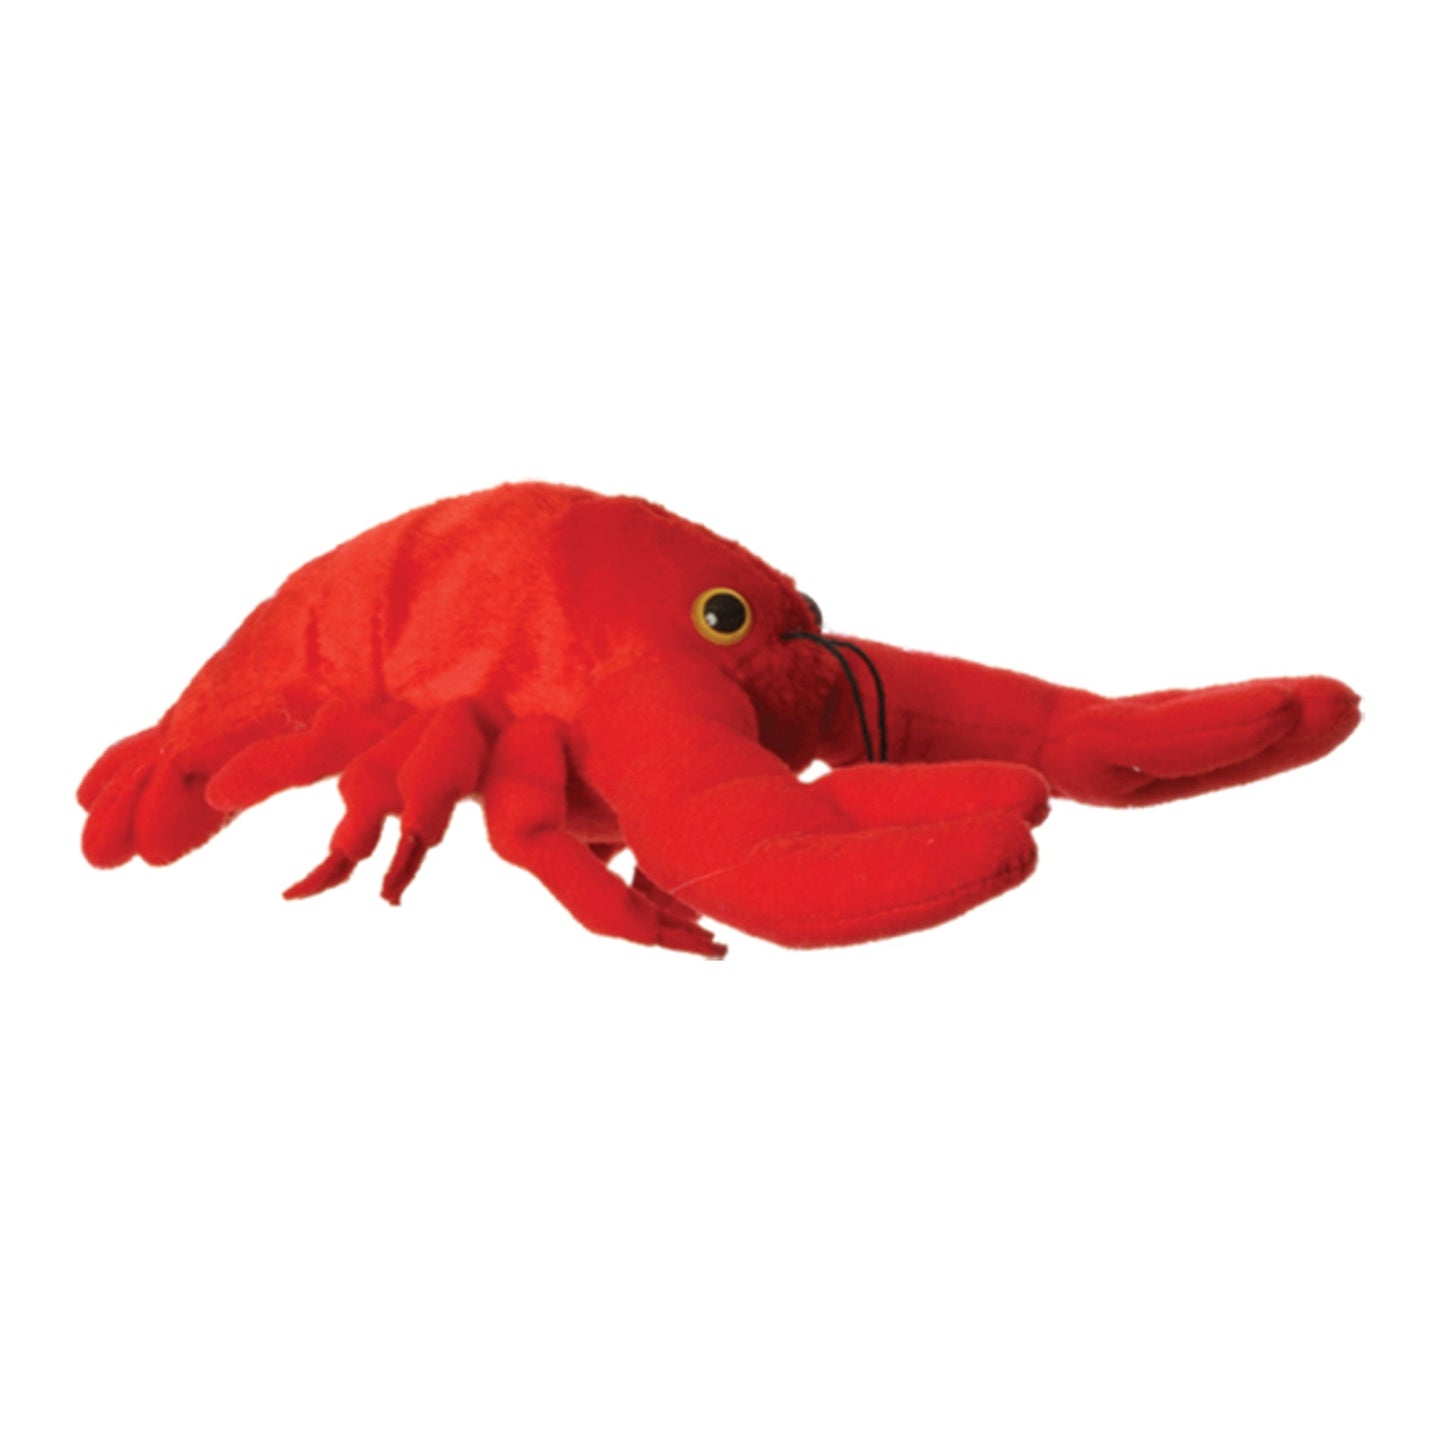 Lobster Finger Puppet - The Puppet Company - The Forgotten Toy Shop